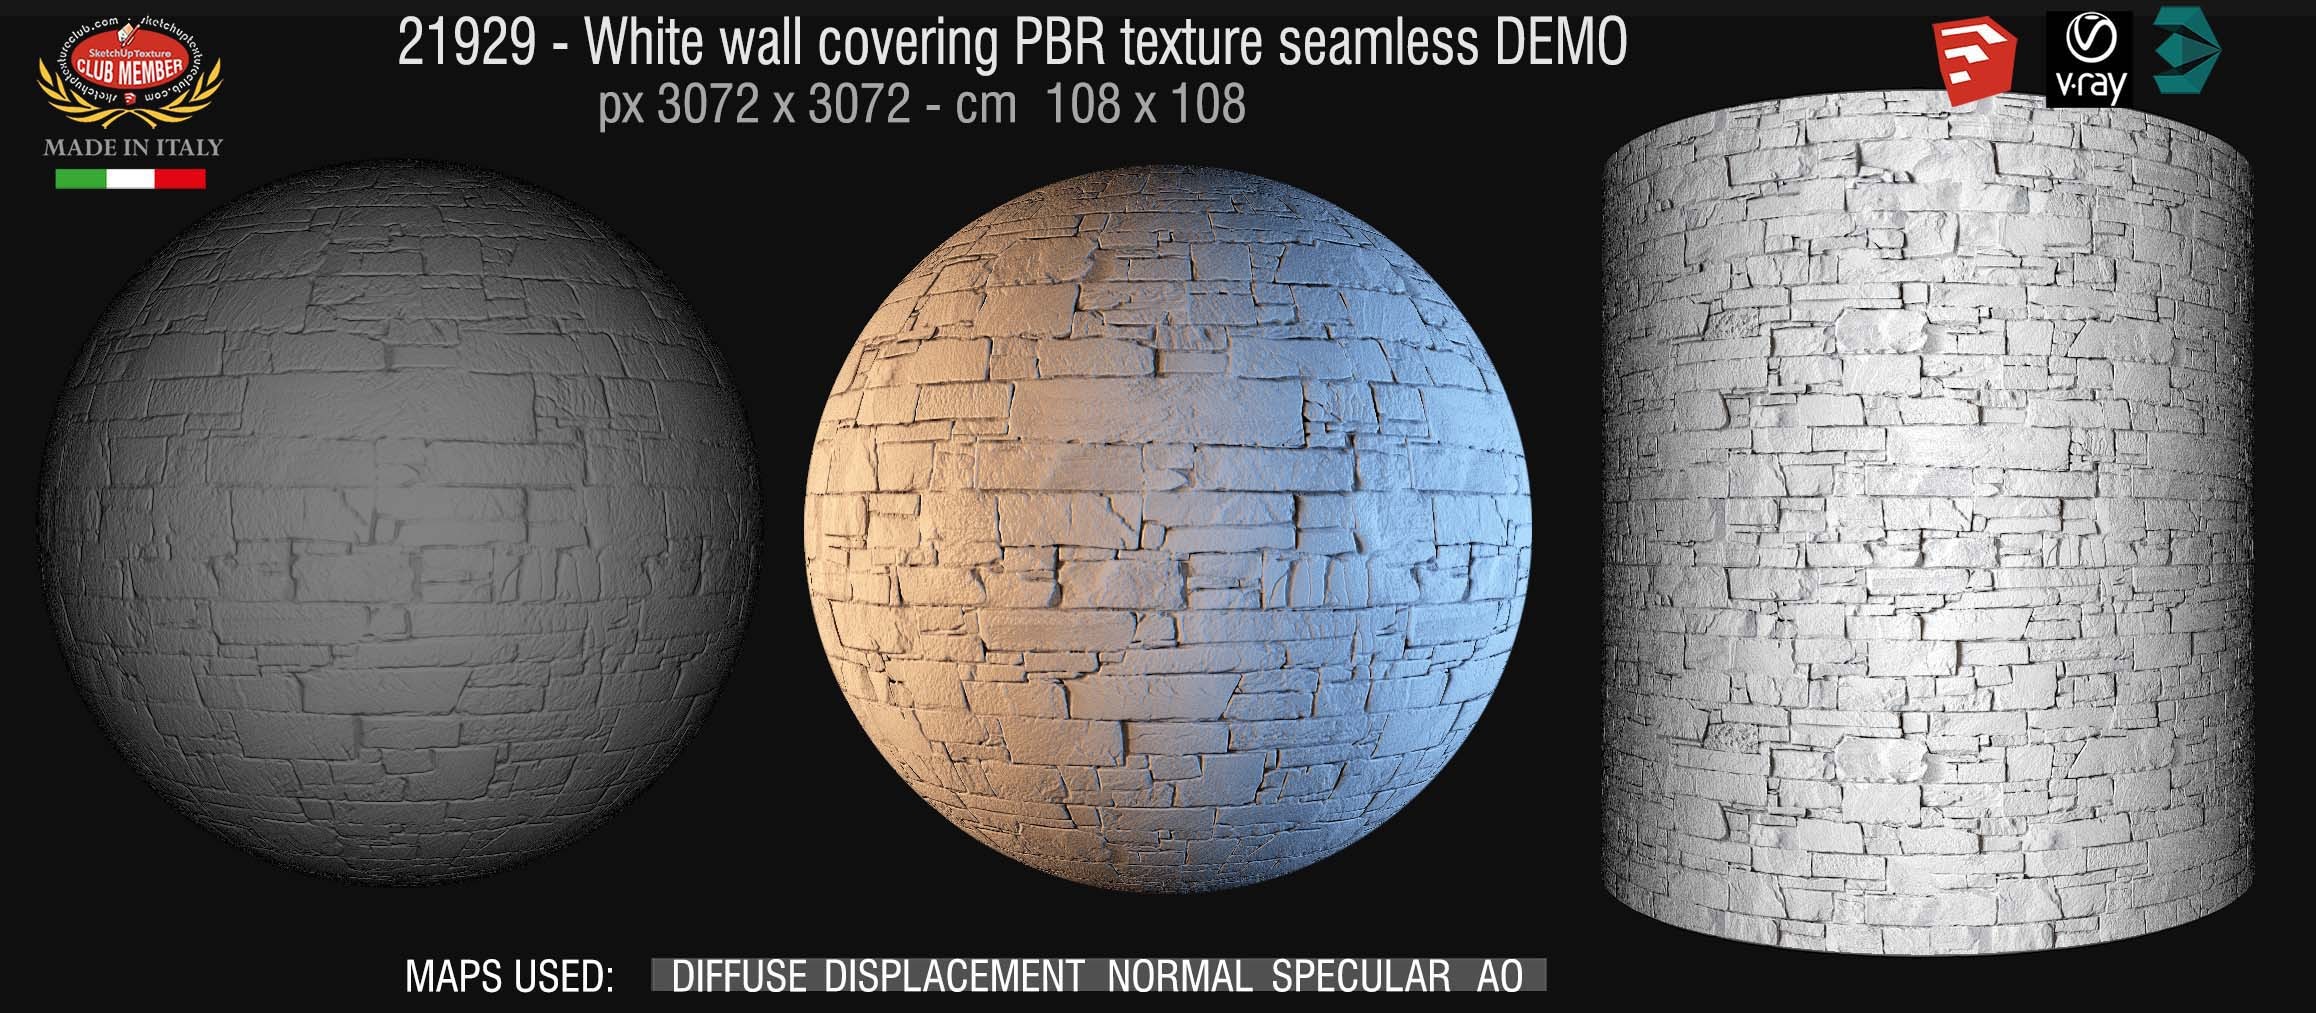 21929 White wall covering PBR texture seamless DEMO